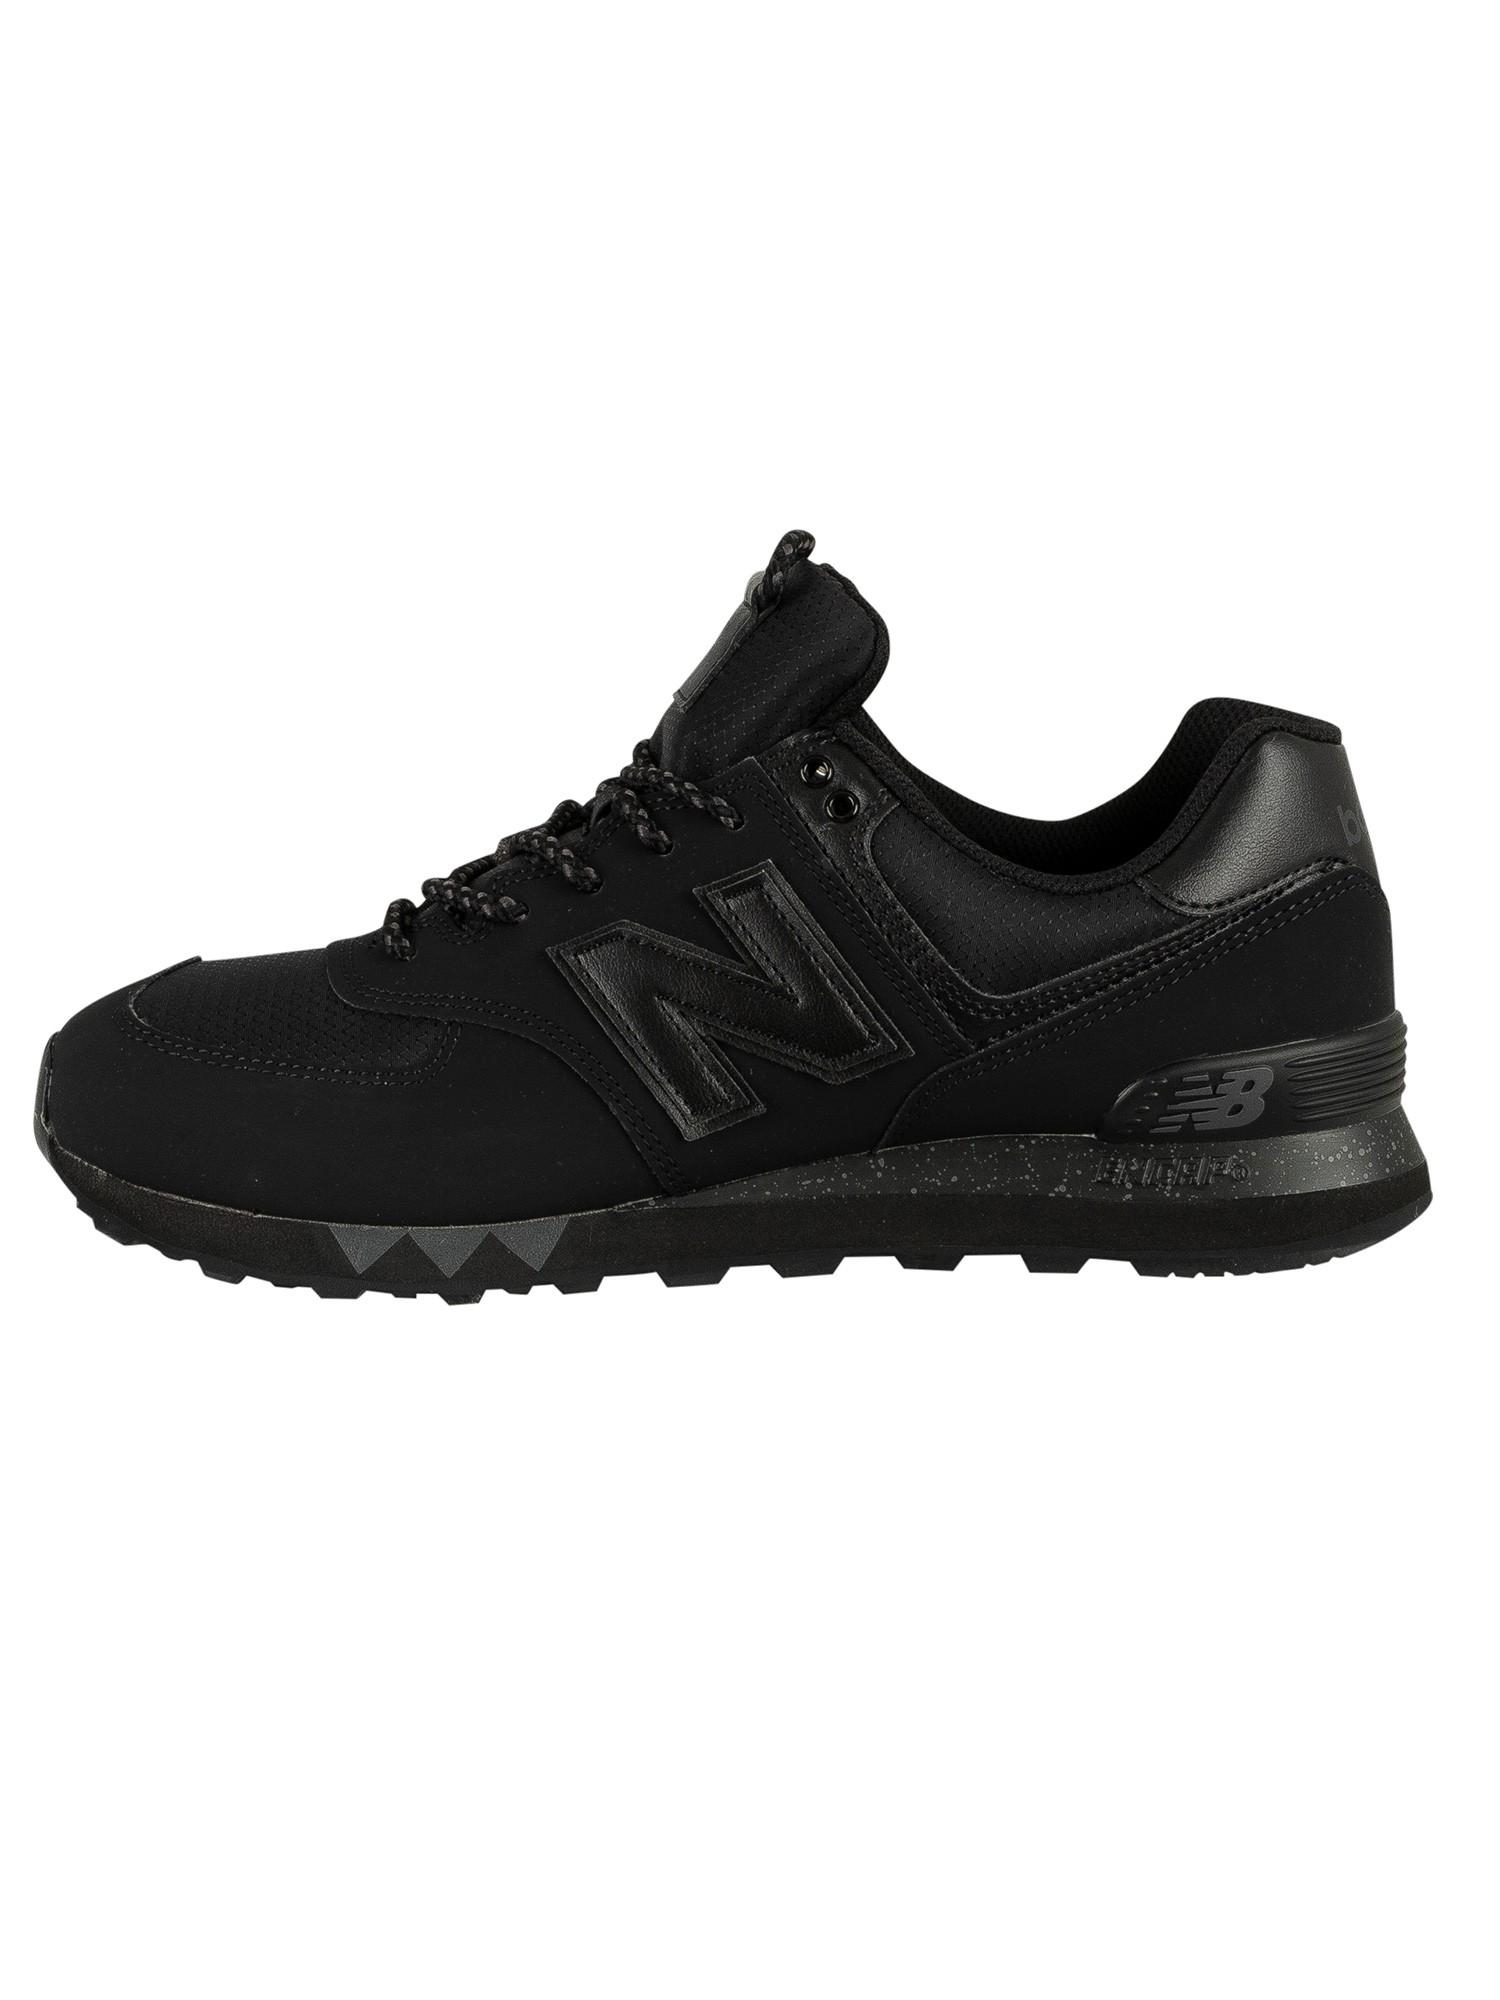 New Balance Suede 574 Leather Trainers in Black for Men - Lyst